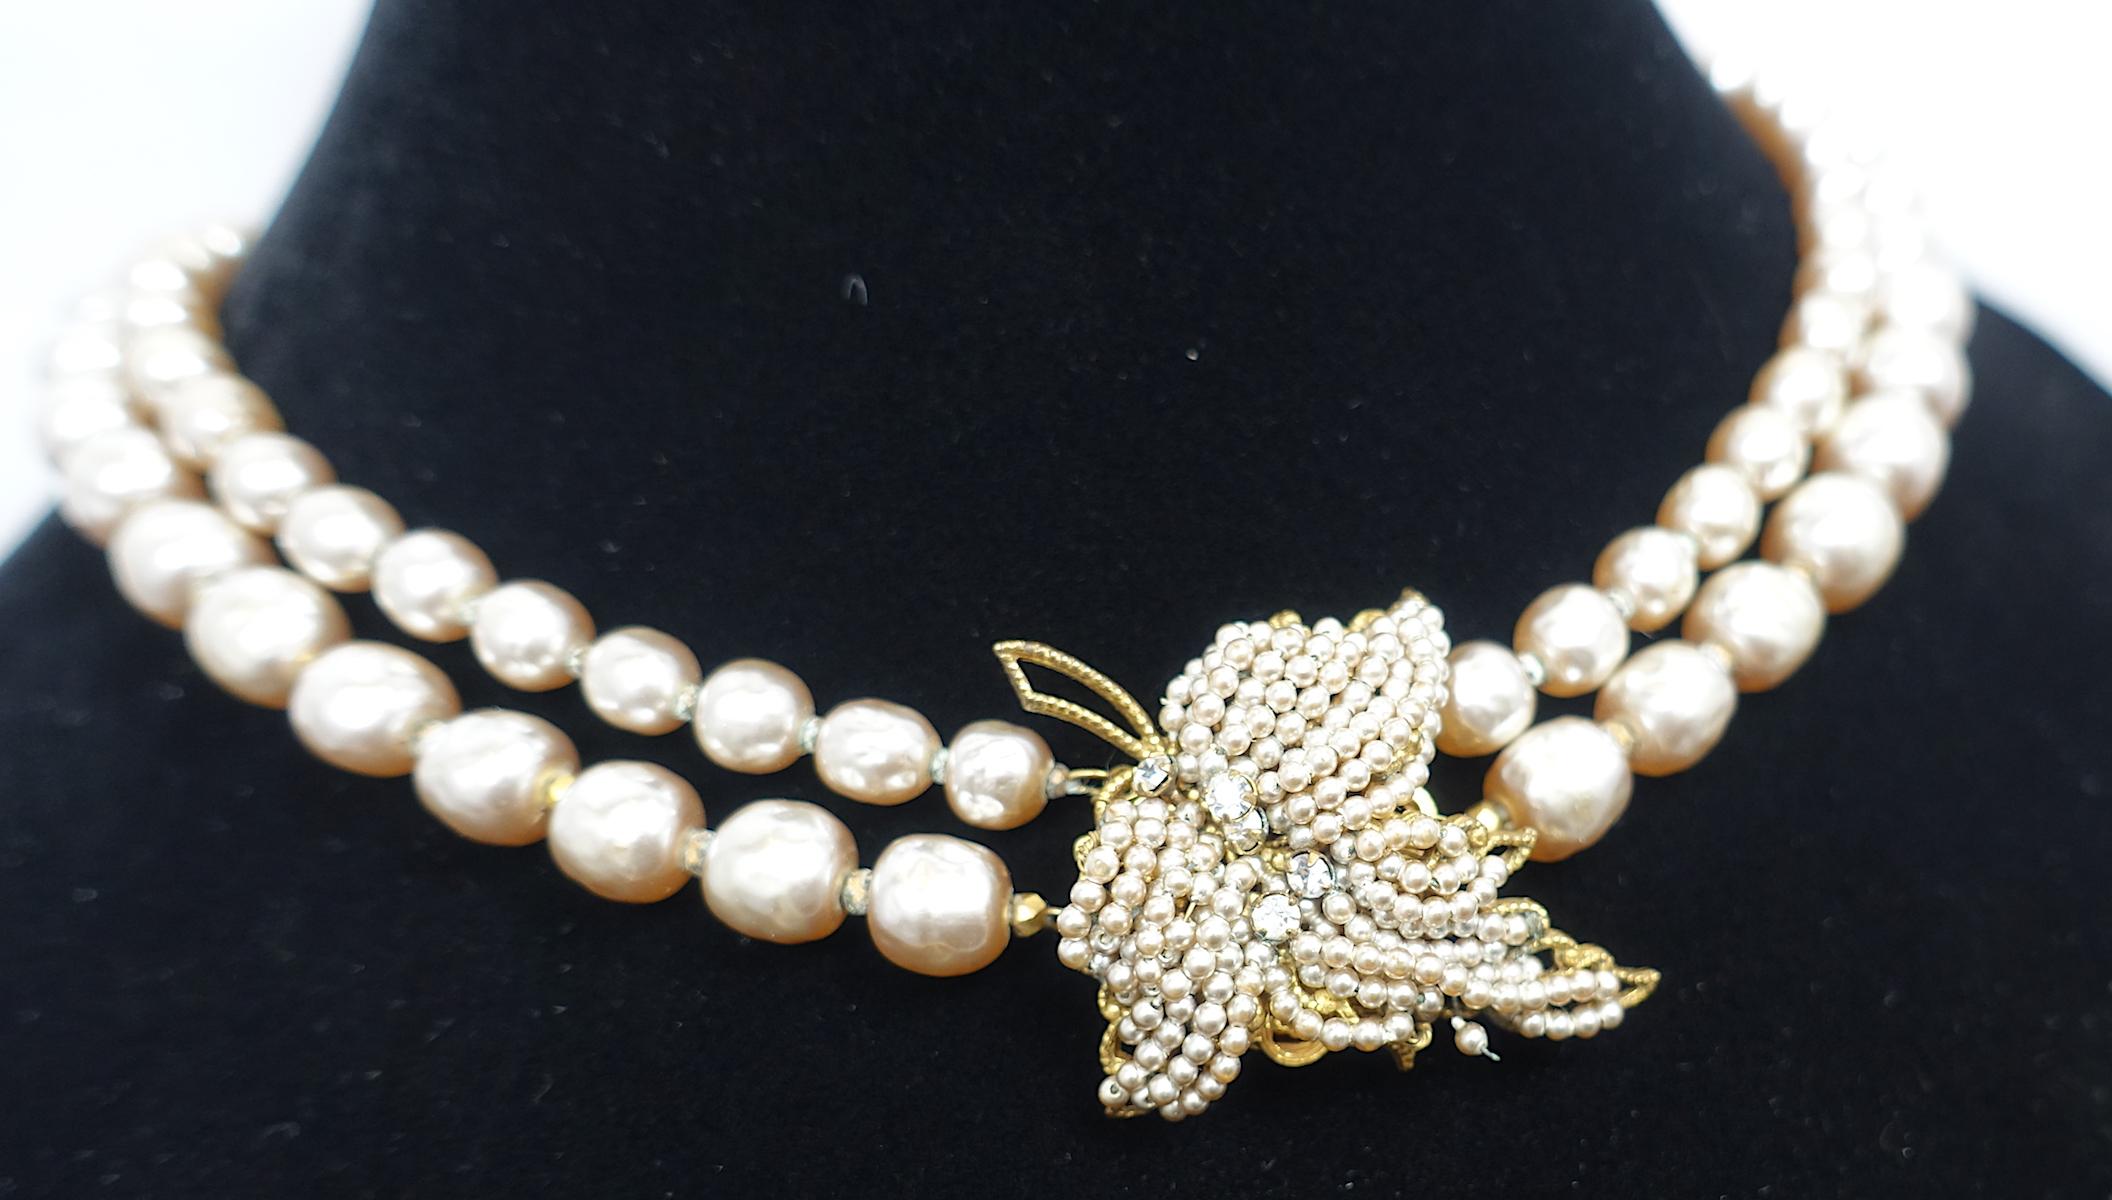 This vintage signed Miriam Haskell necklace has a leaf design encrusted with faux seed pearls. It has two strands of faux pearls in a gold tone setting.  This necklace measures 15-1/4” with a slide-in clasp. The leaf is 1-5/8” x 1-1/4”.  In